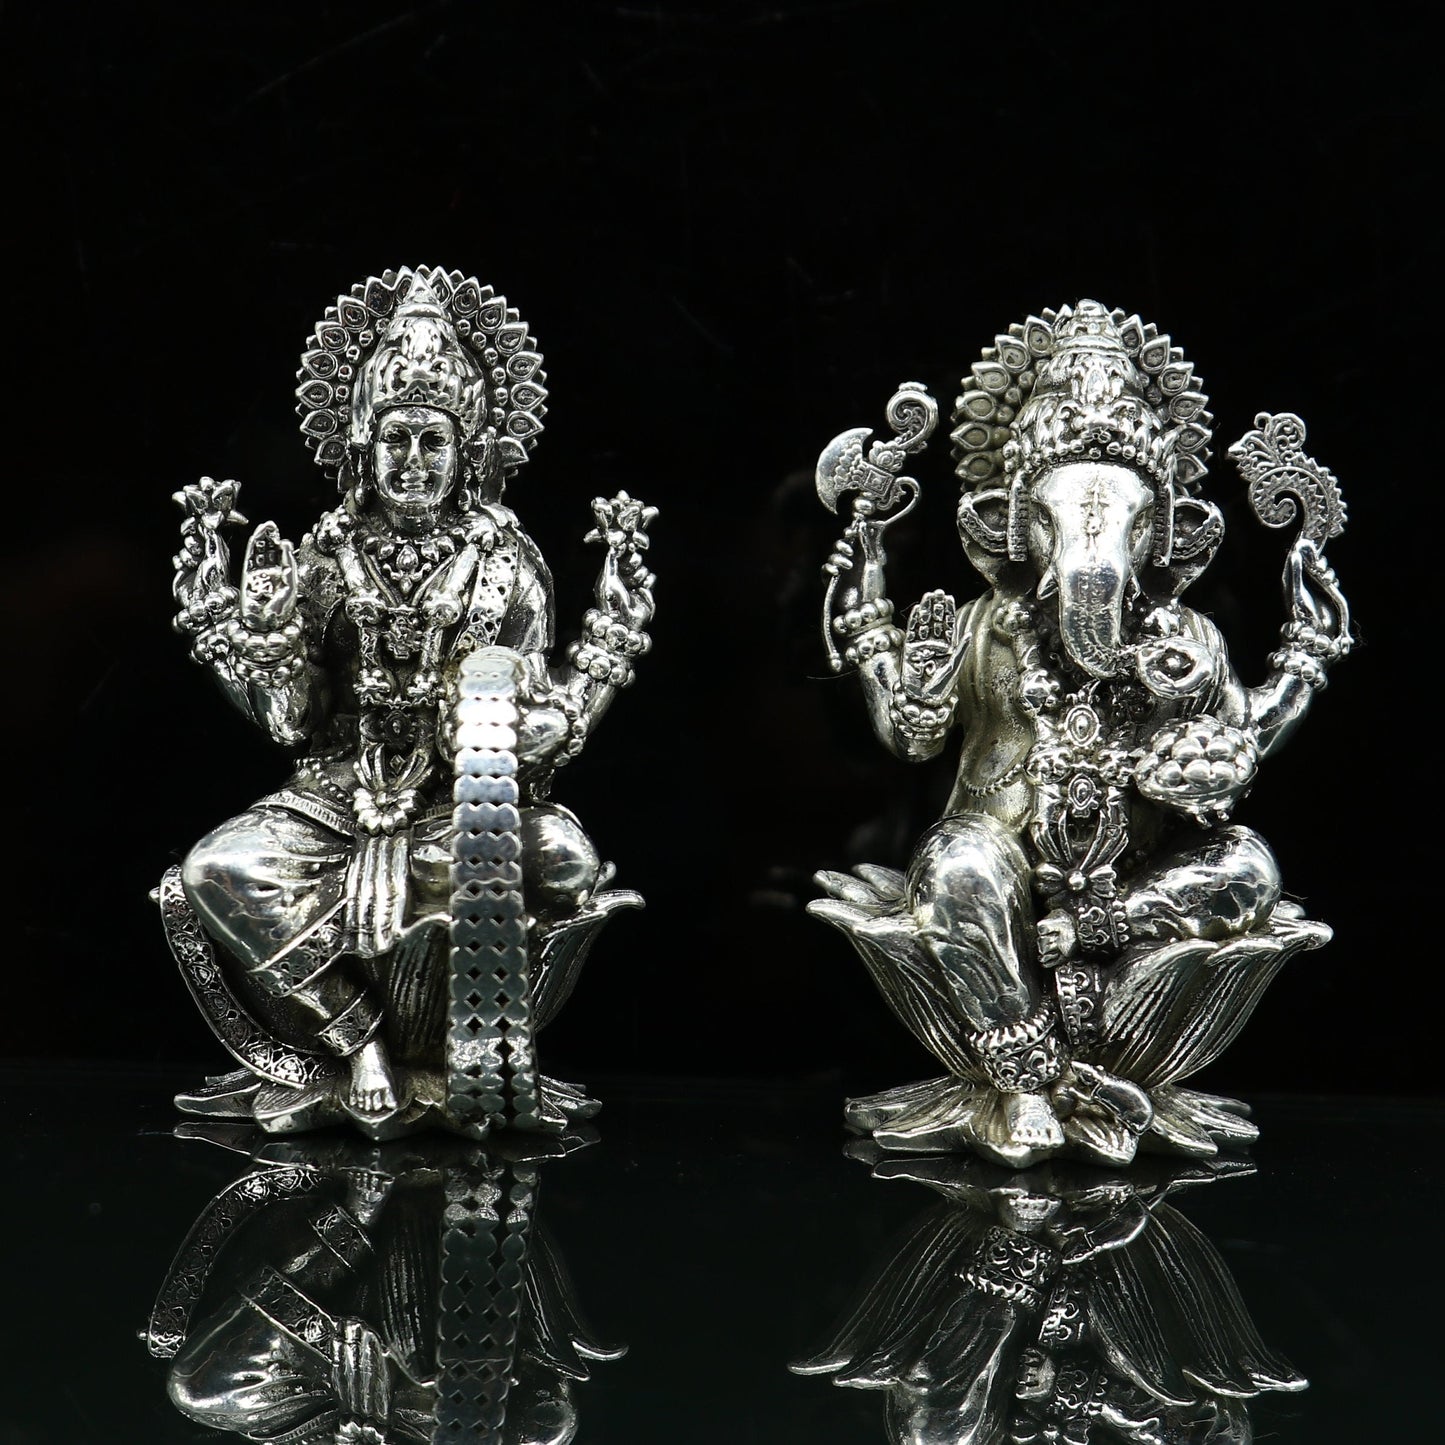 Combo Laxmi and Ganesha 925 Sterling silver handmade customized Hindu idols statue, puja article figurine, home décor puja Articles art27 - TRIBAL ORNAMENTS